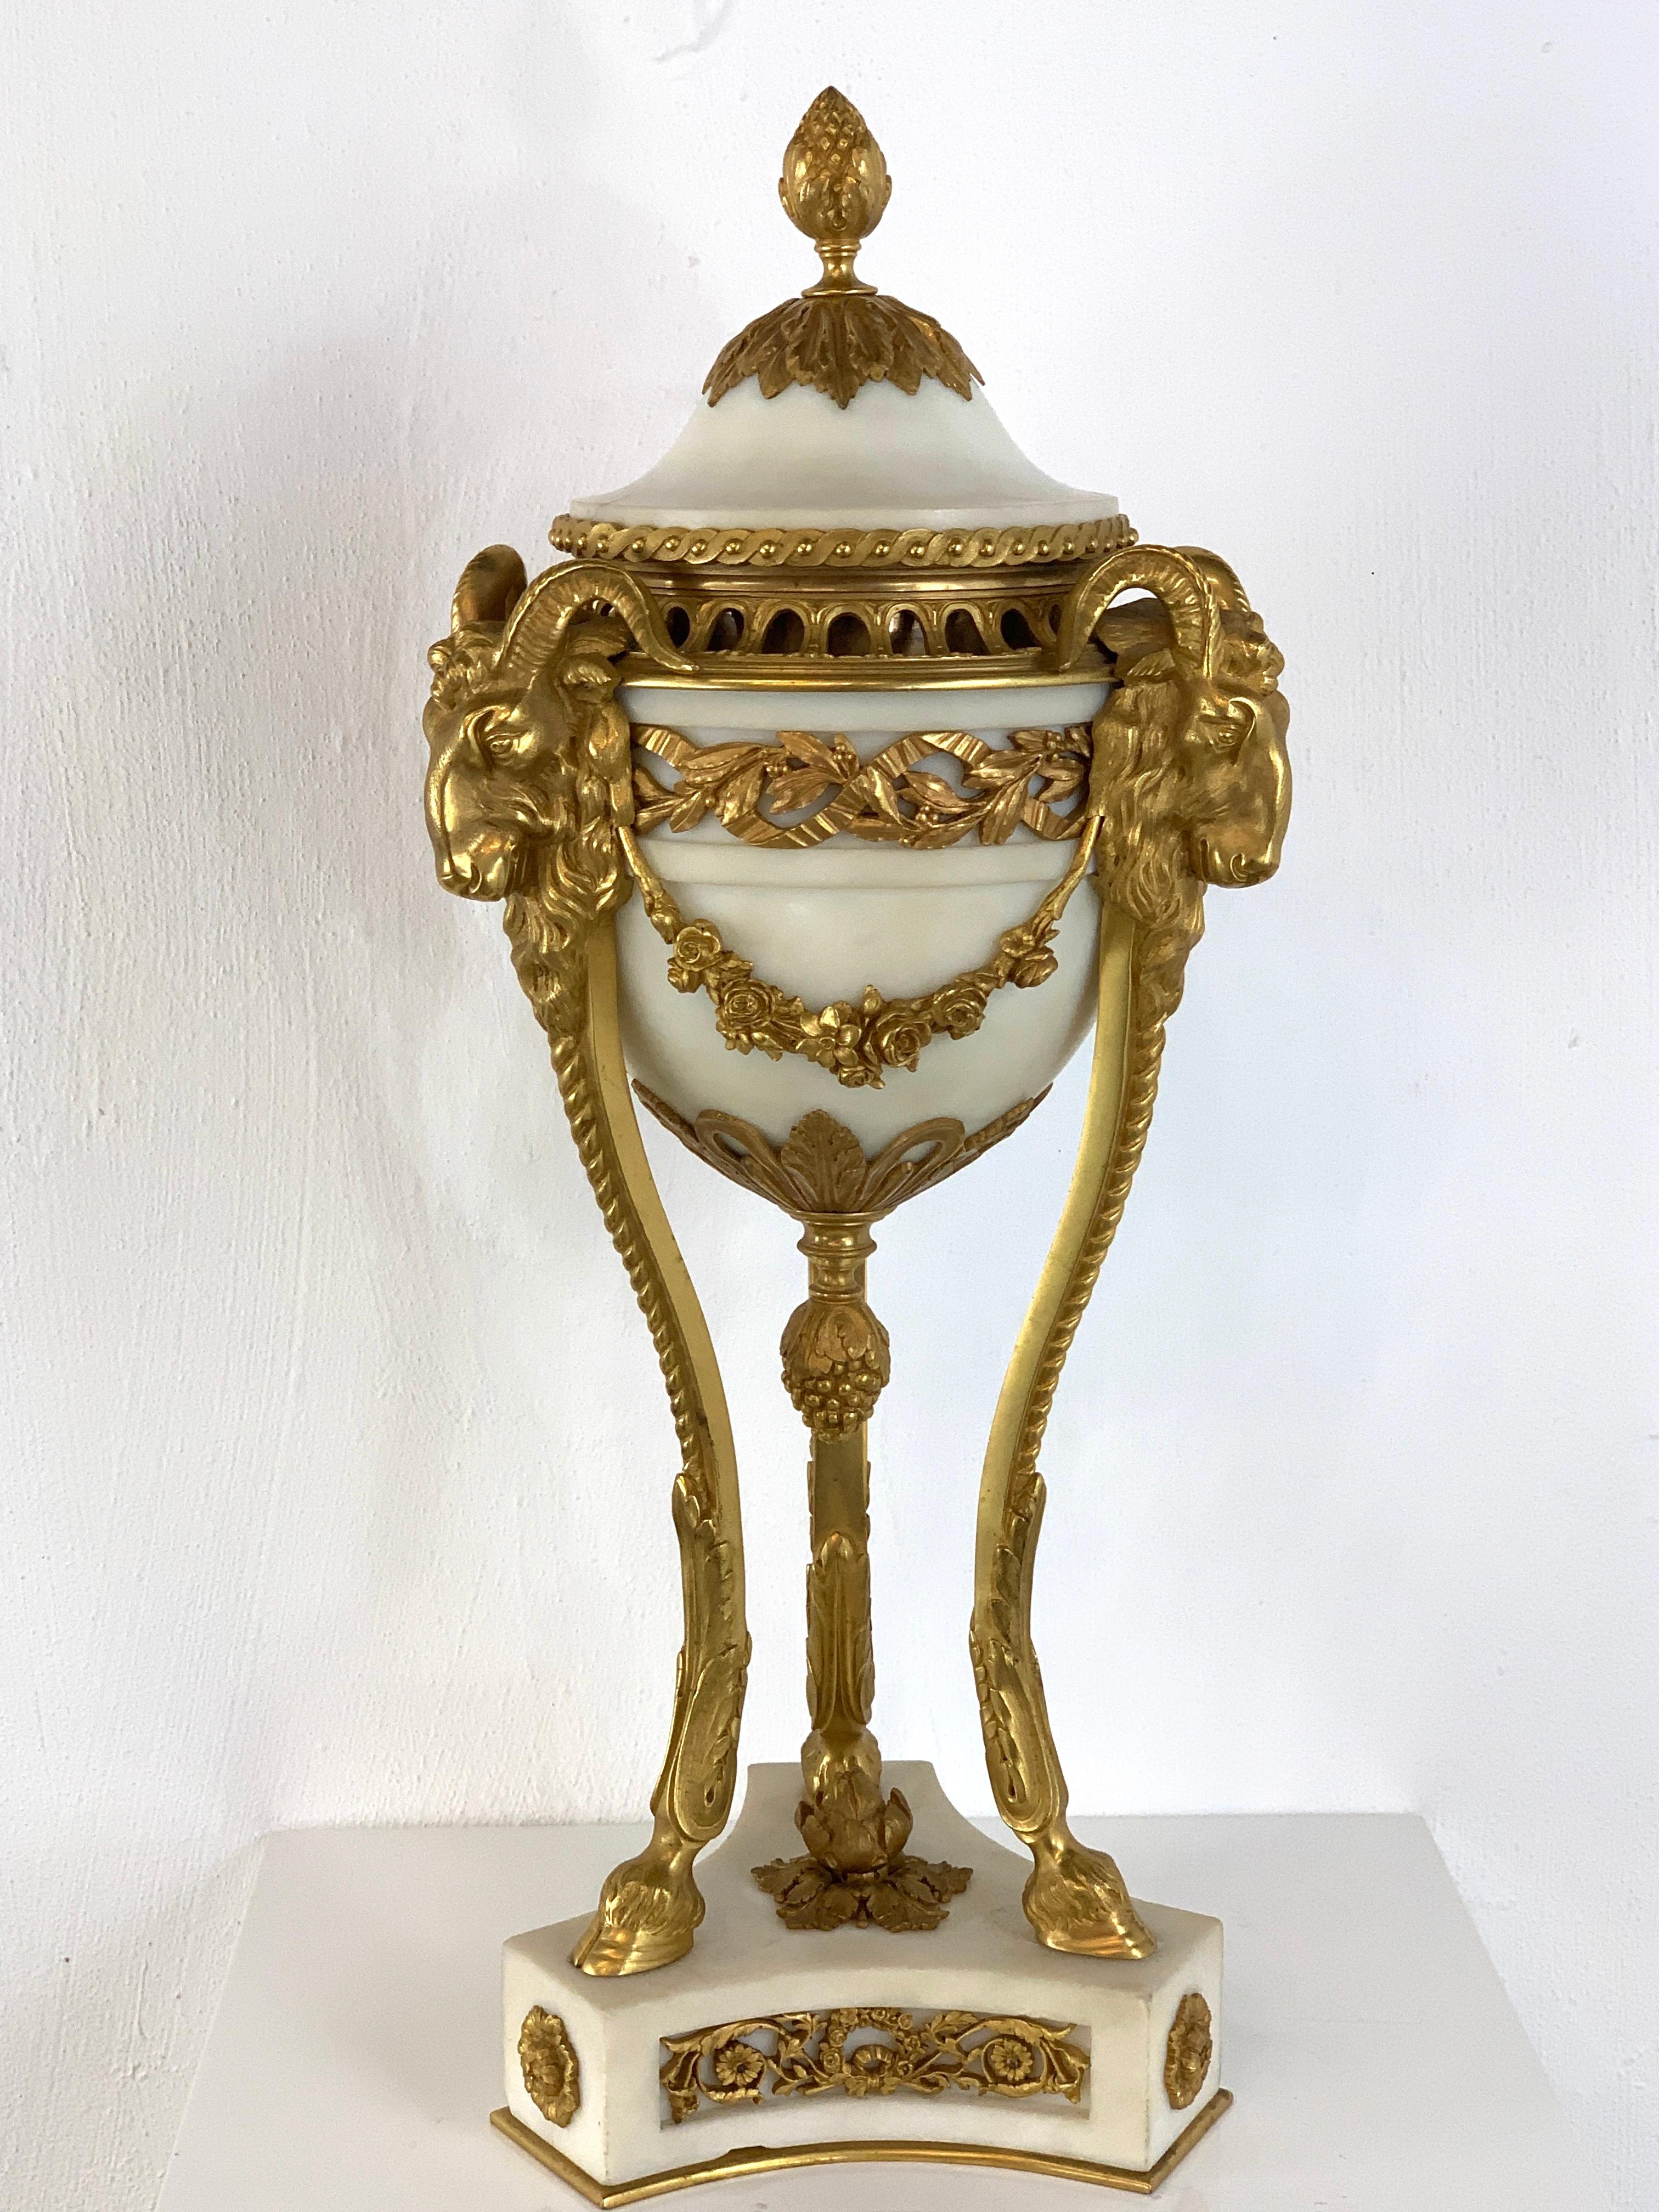 Single Louis XVI style ormolu and marble neoclassical cassolette/urn, magnificent quality with removable lid, three Rams heads, standing 22.5